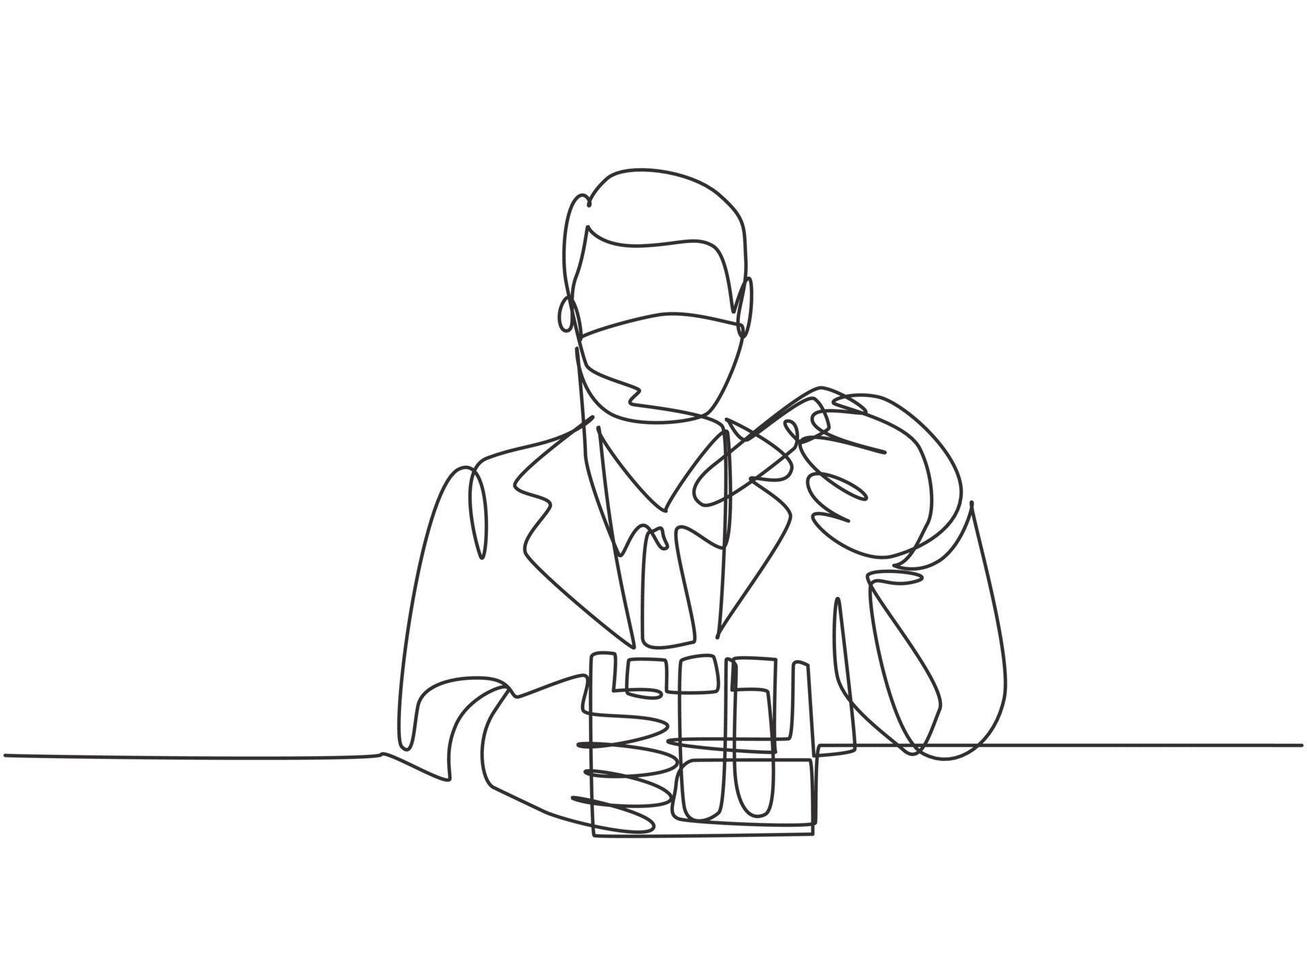 One continuous line drawing of young male laboratorian test blood sample from glass tube to find covid-19 vaccine. Coronavirus medical research concept single line draw design vector illustration